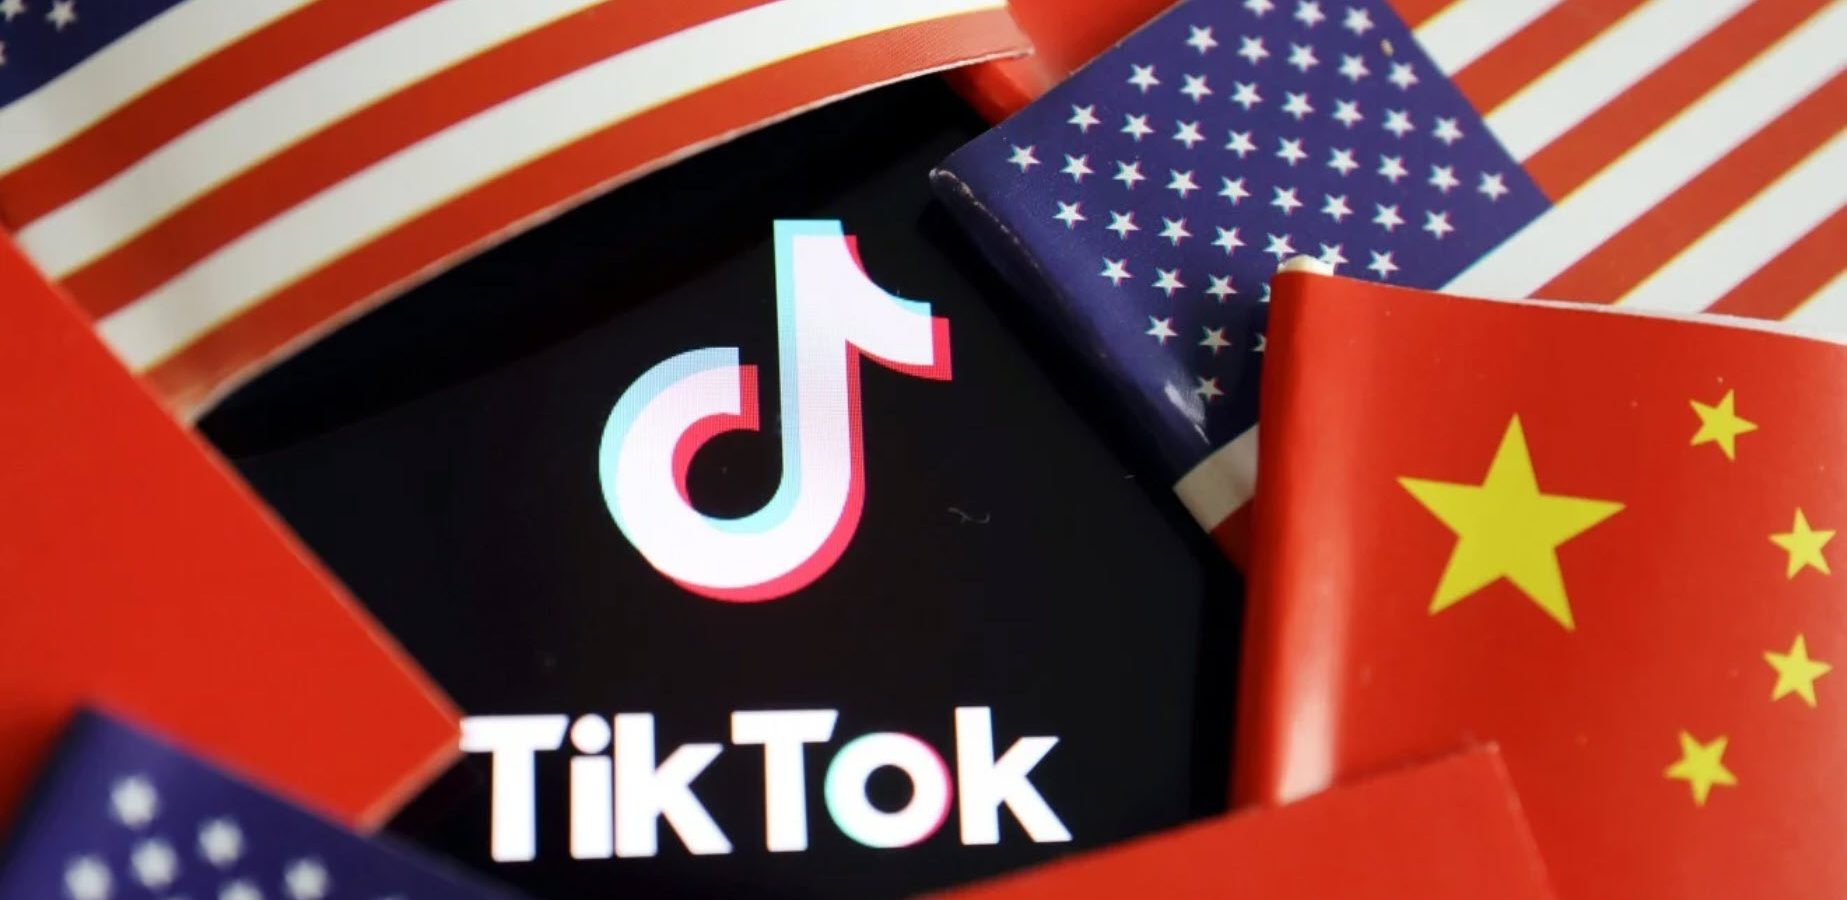 Is US pressuring allies like Japan to ban Chinese technology and apps like TikTok?